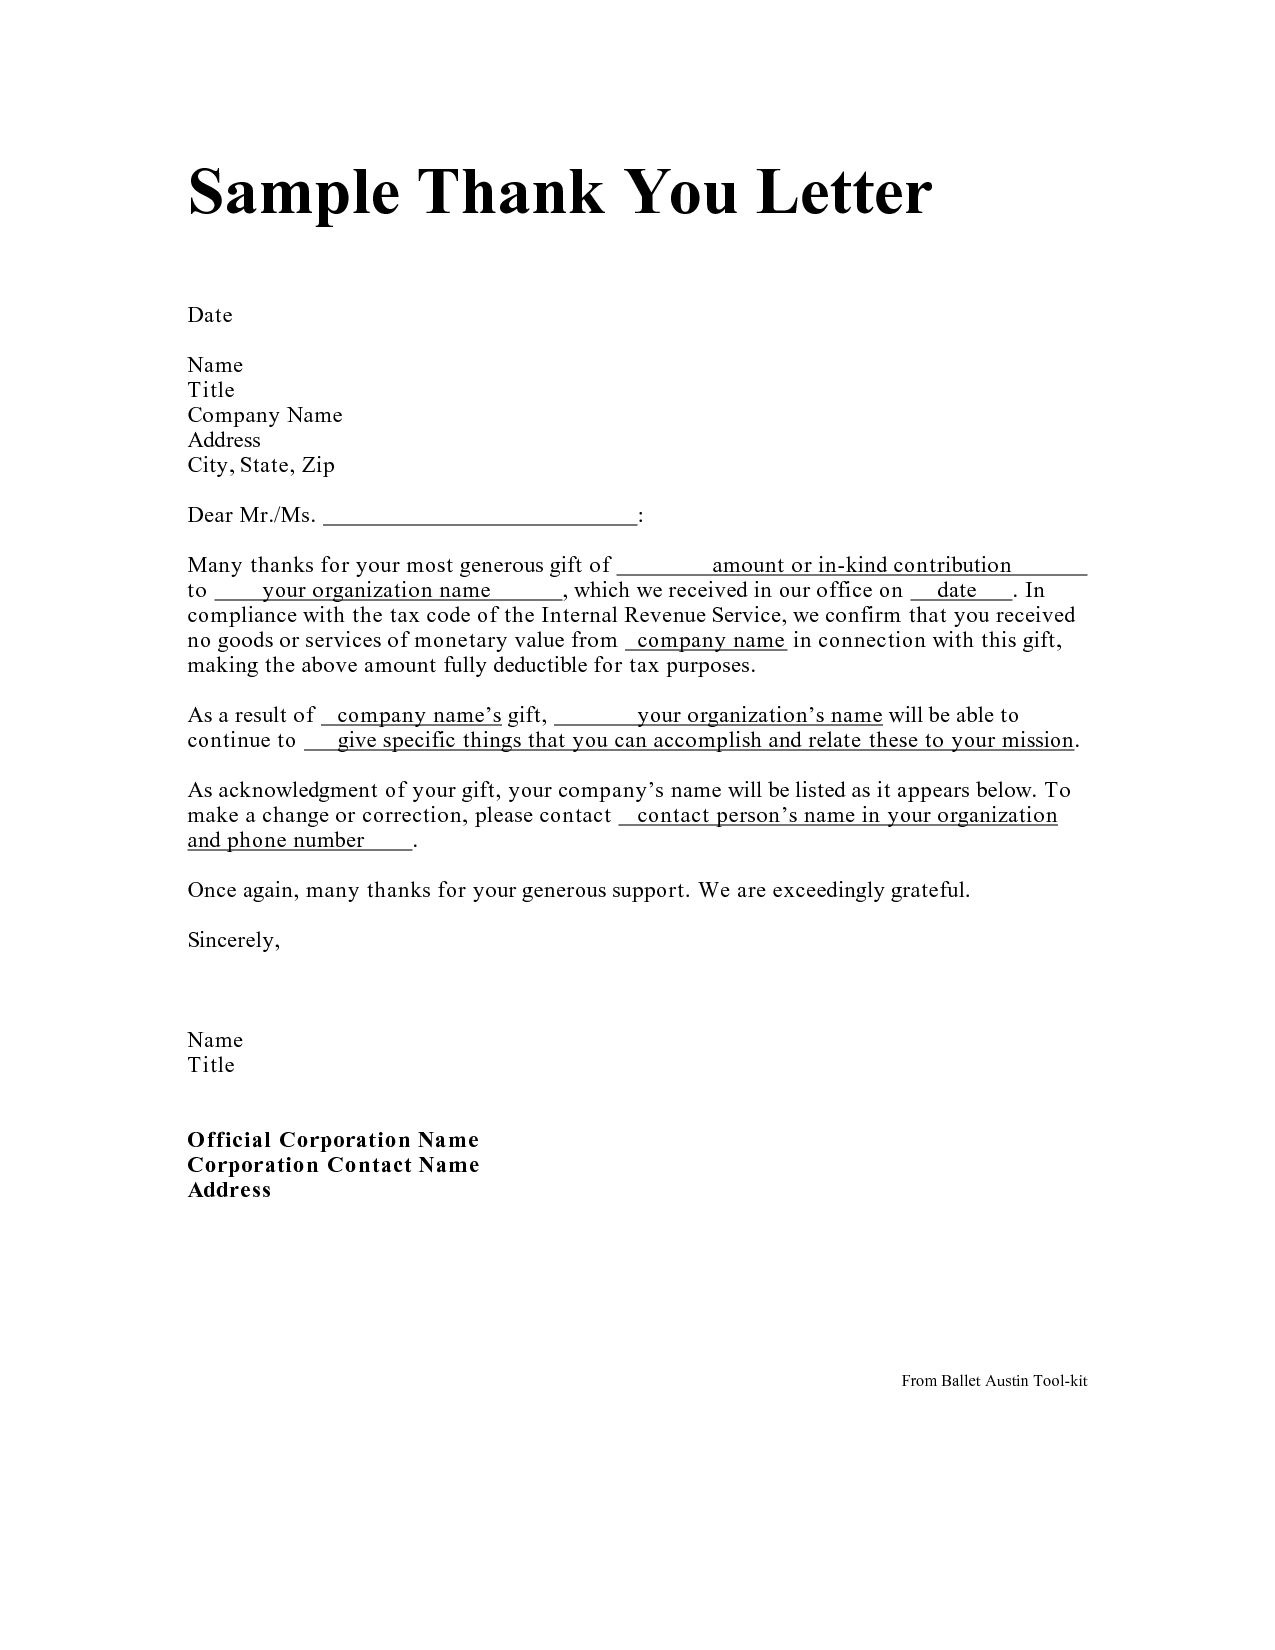 Gift Letter Template Word - Personal Thank You Letter Personal Thank You Letter Samples